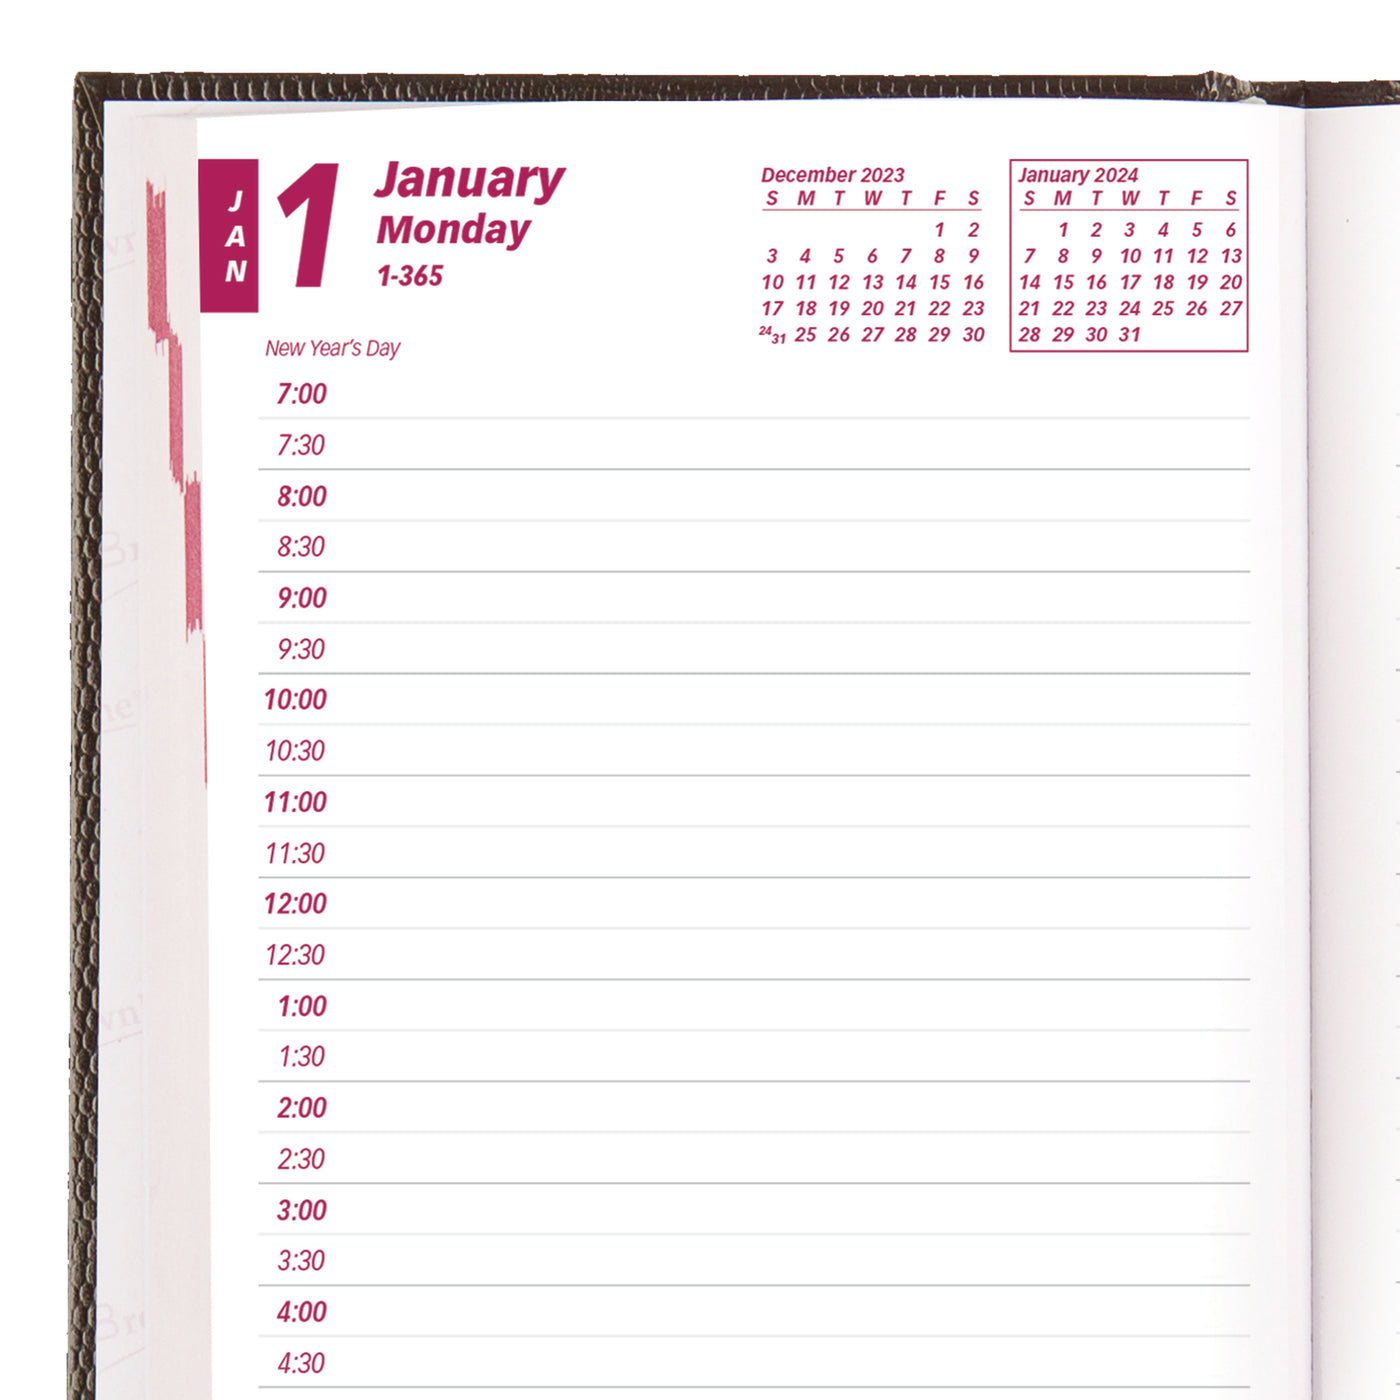 Brownline Daily Planner - 5" x 8" - Black Cover